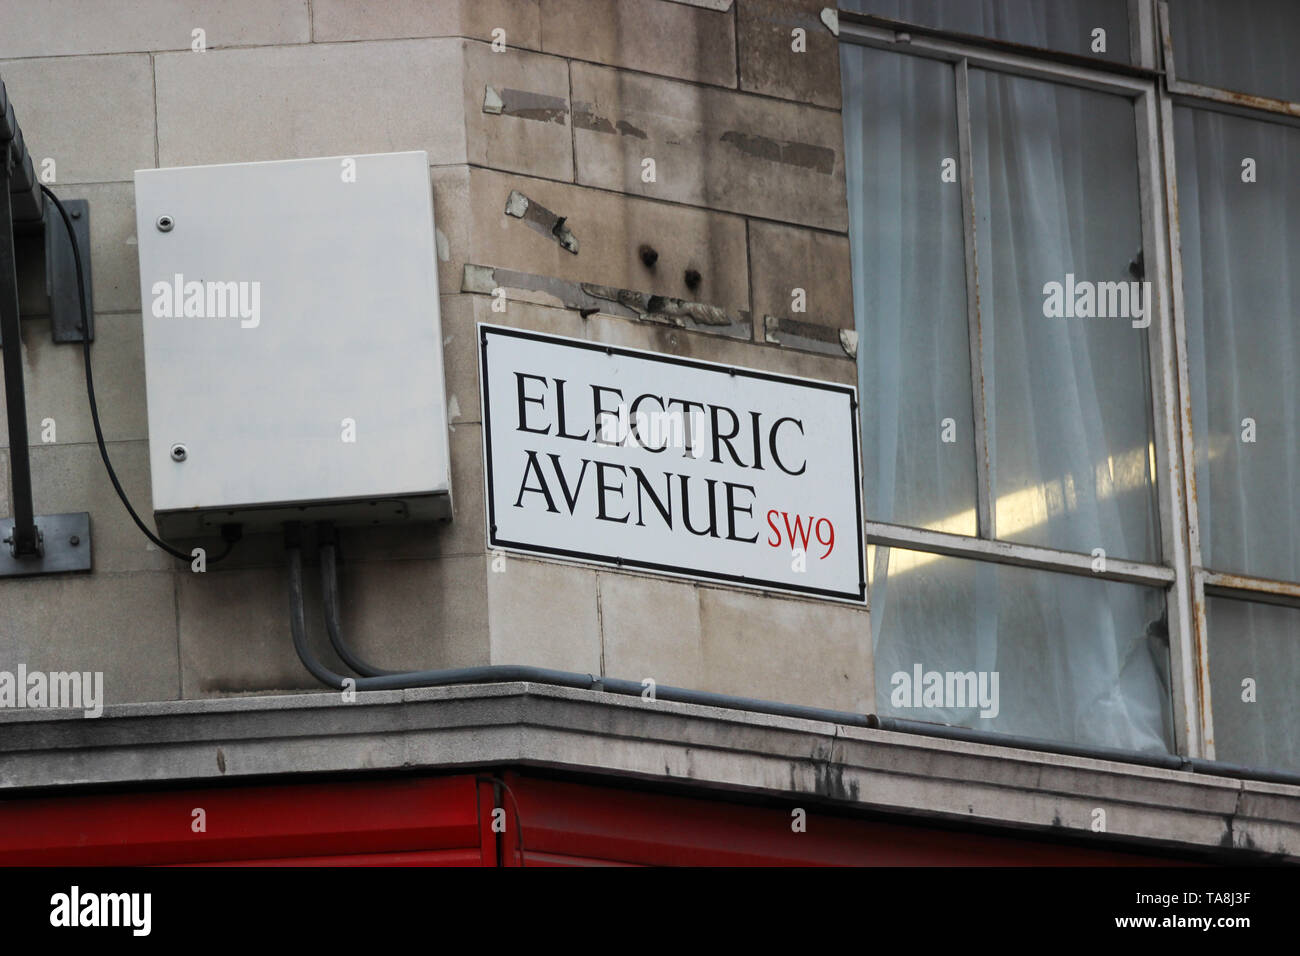 Electric Avenue street sign in Brixton, London Stock Photo